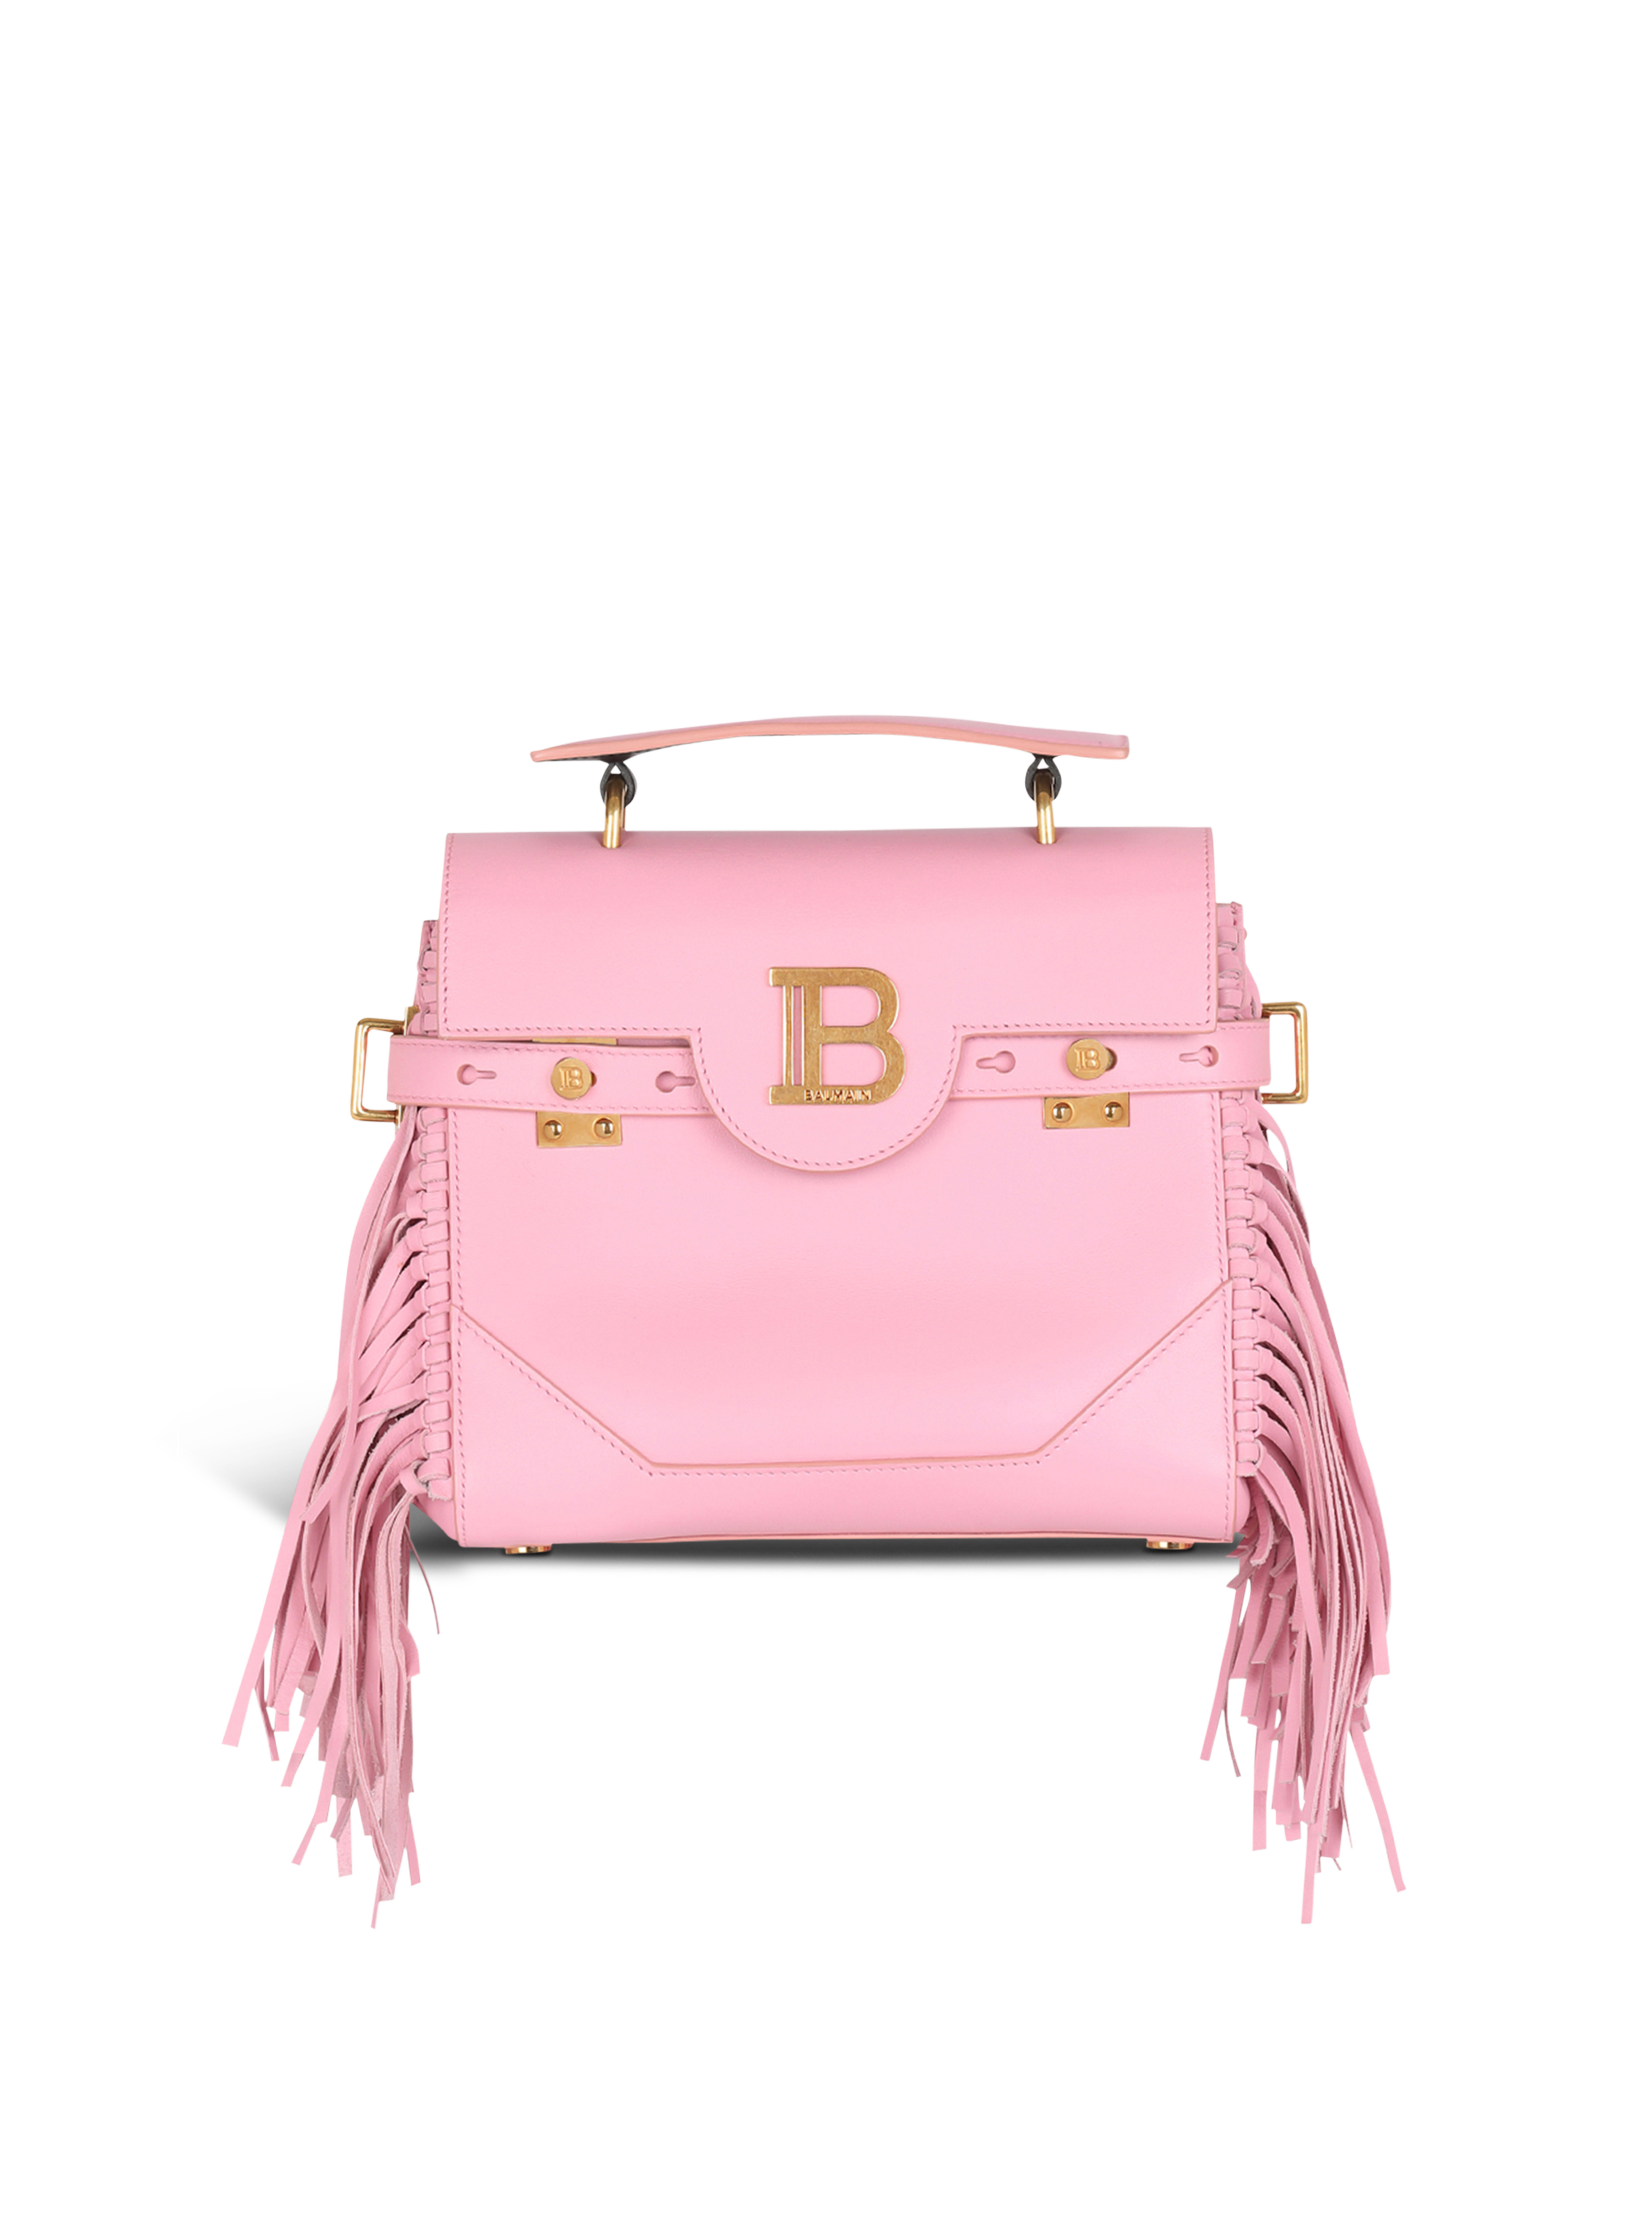 Smooth leather B-Buzz 23 bag with fringe, pink